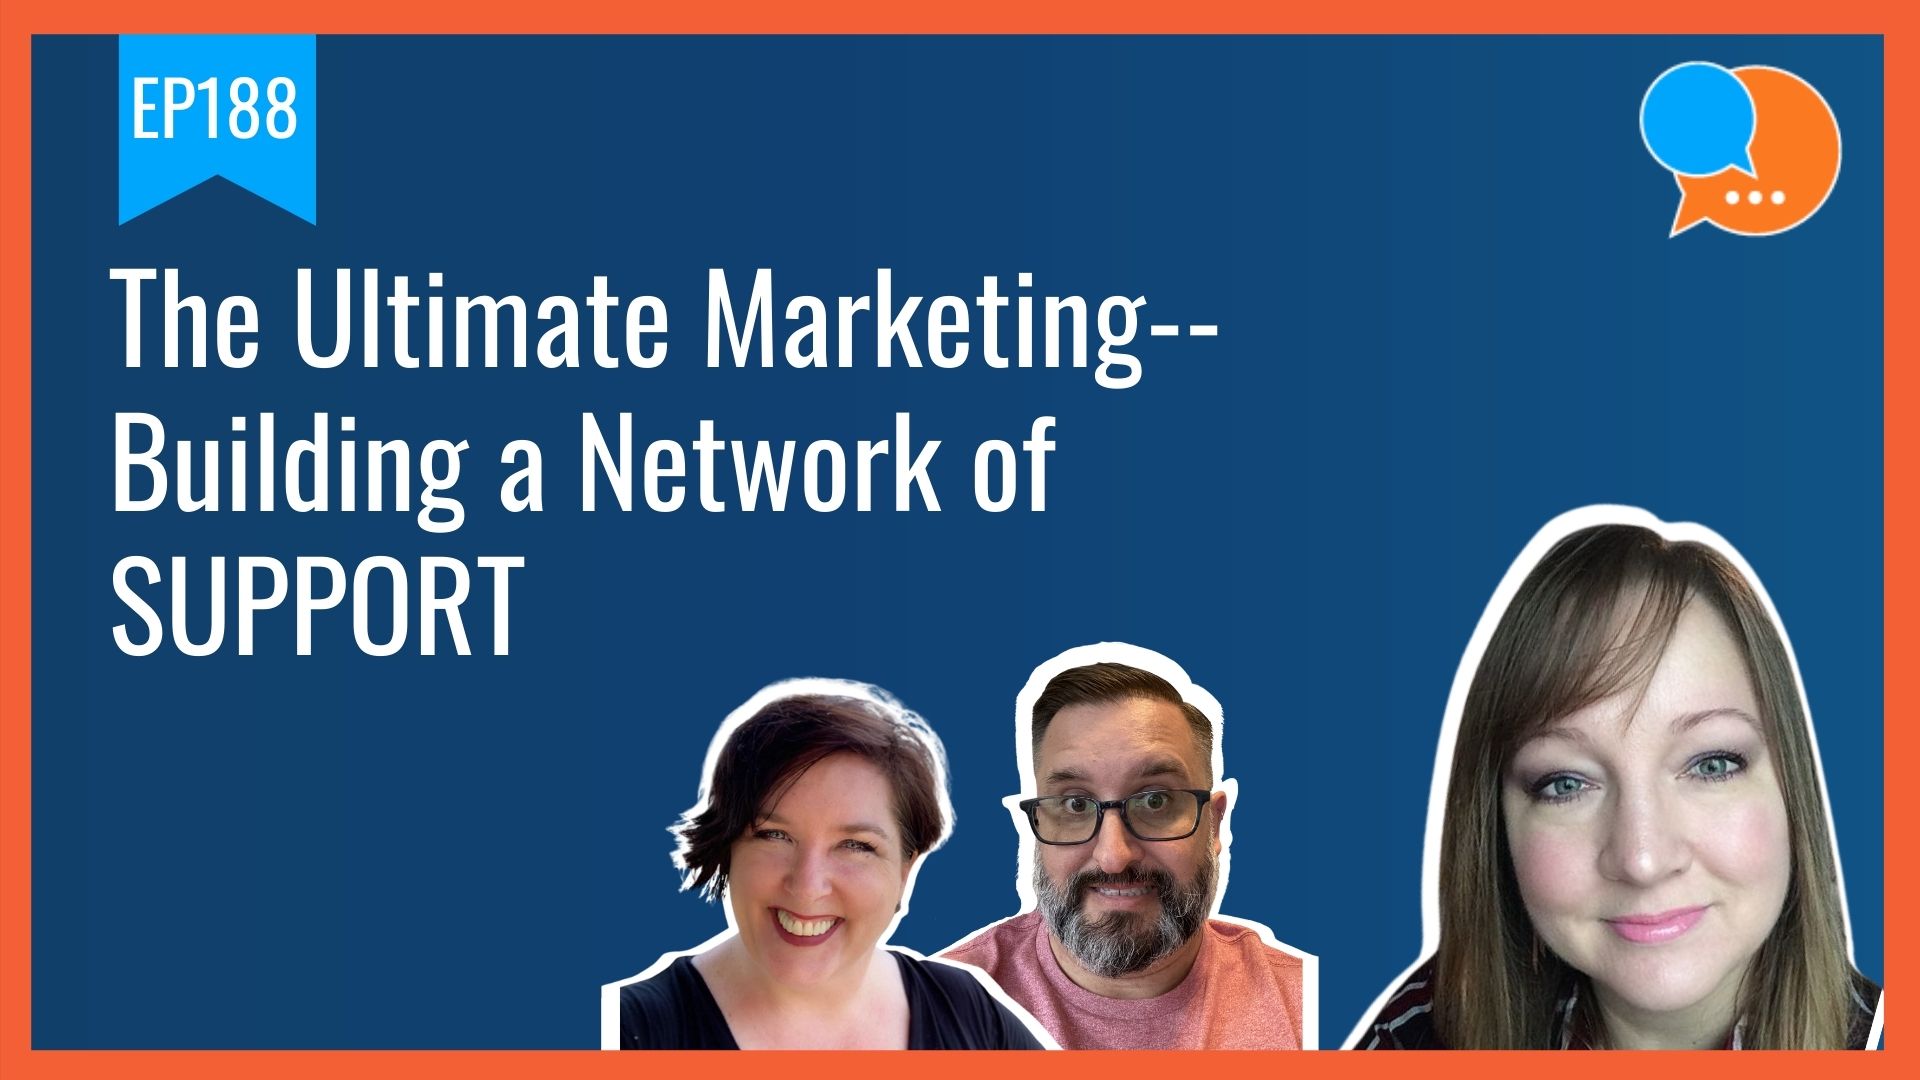 EP188 - The Ultimate Marketing--Building a Network of SUPPORT